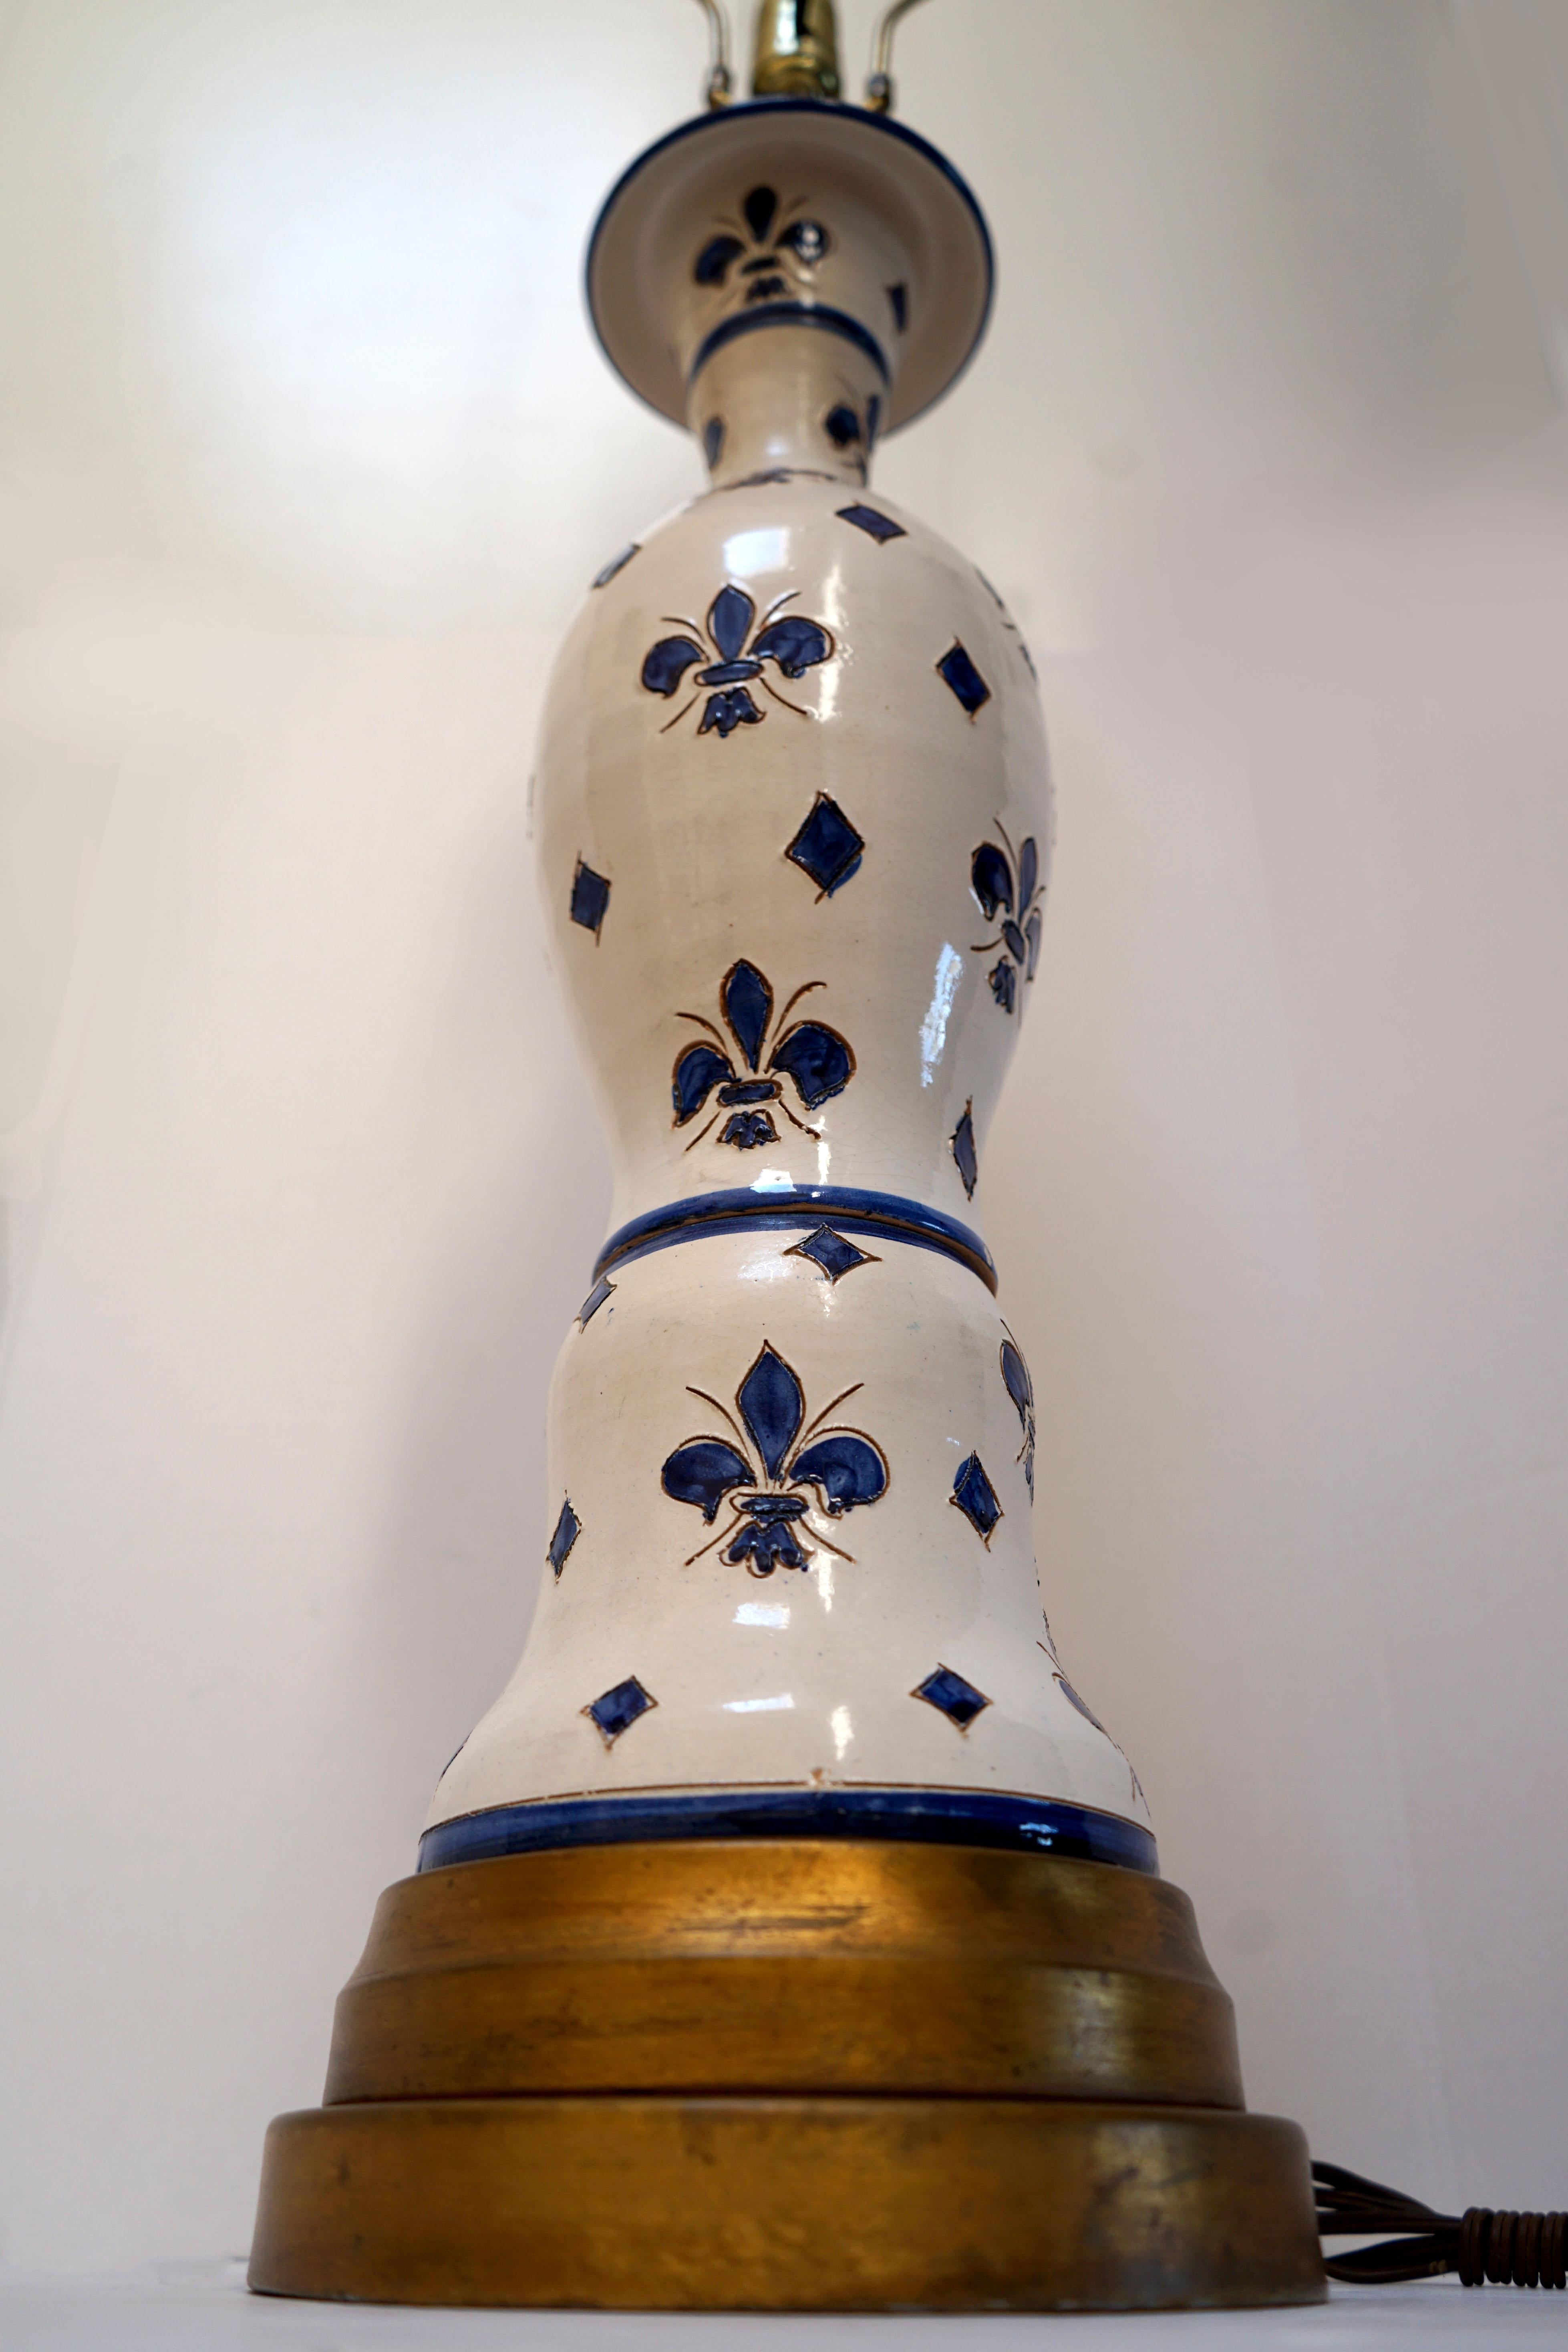 Blue and white baluster shape and delicately carved fleur de lys in blue on white ceramic is reason enough to covet this beautiful oversized table lamp produced between 1940 and 1960. The collar like neck complements the gold circular wooden base.